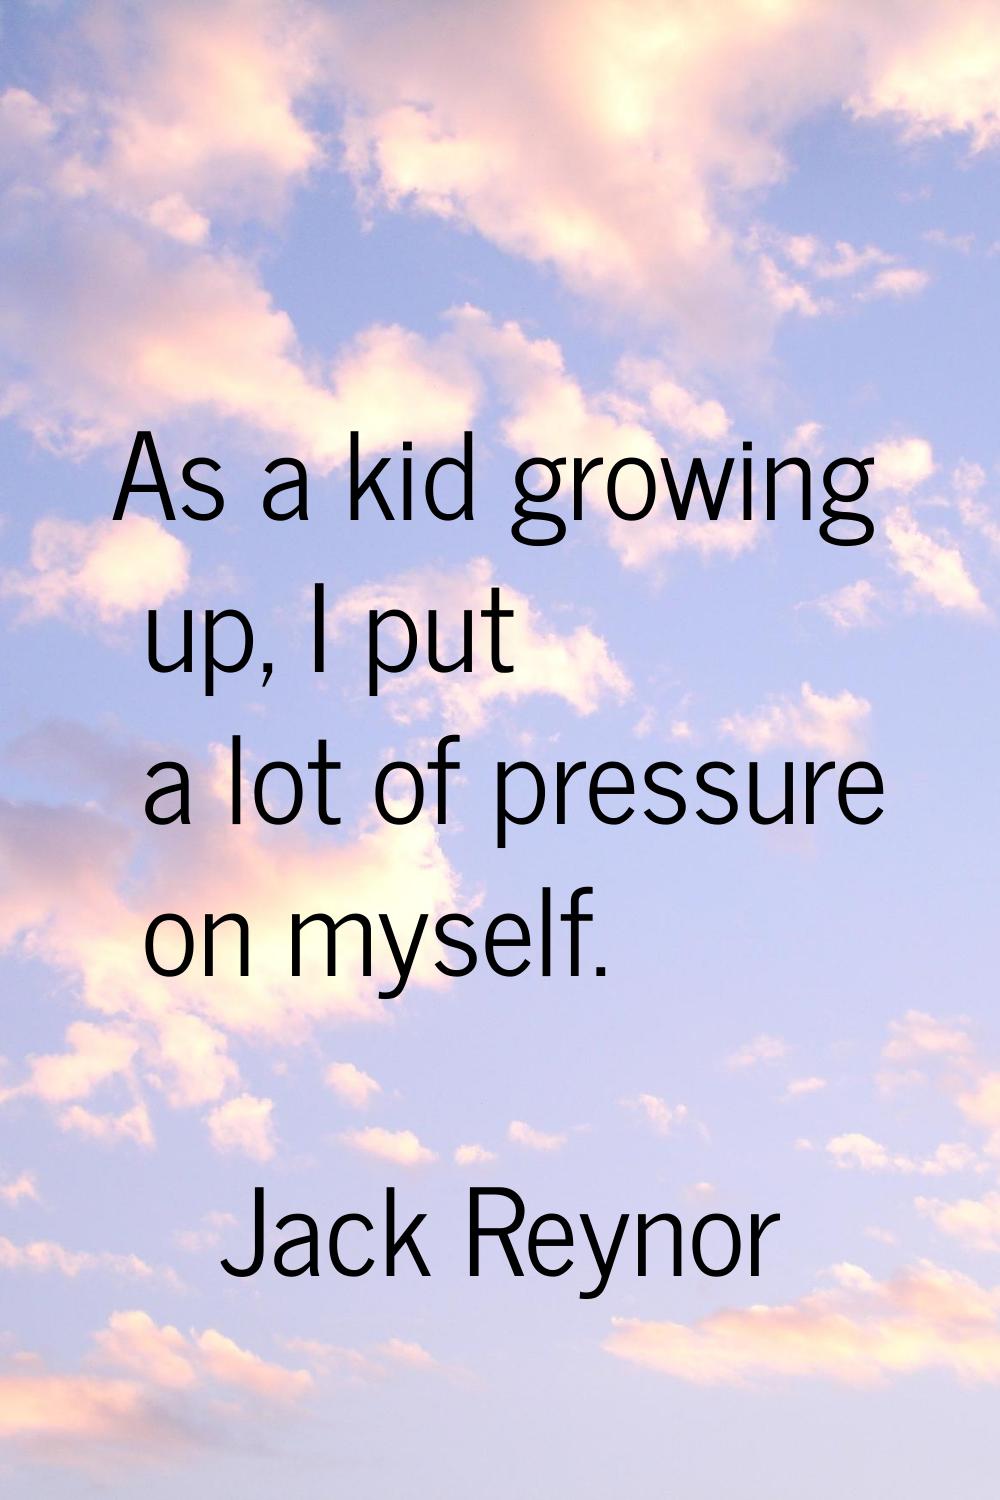 As a kid growing up, I put a lot of pressure on myself.